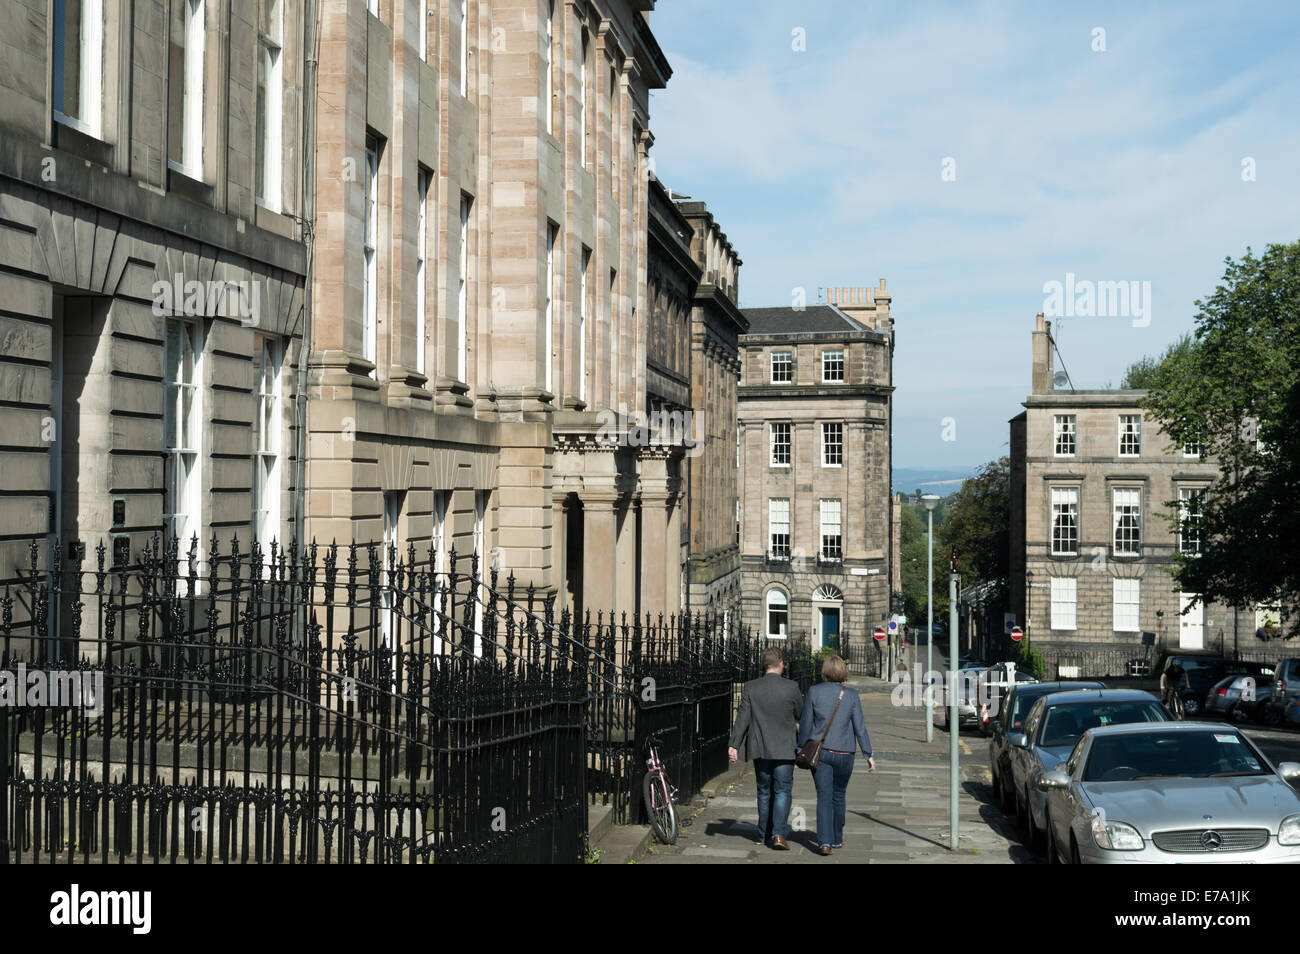 Man and woman walking along the street in Wemyss Place. Edinburgh New Town Stock Photo